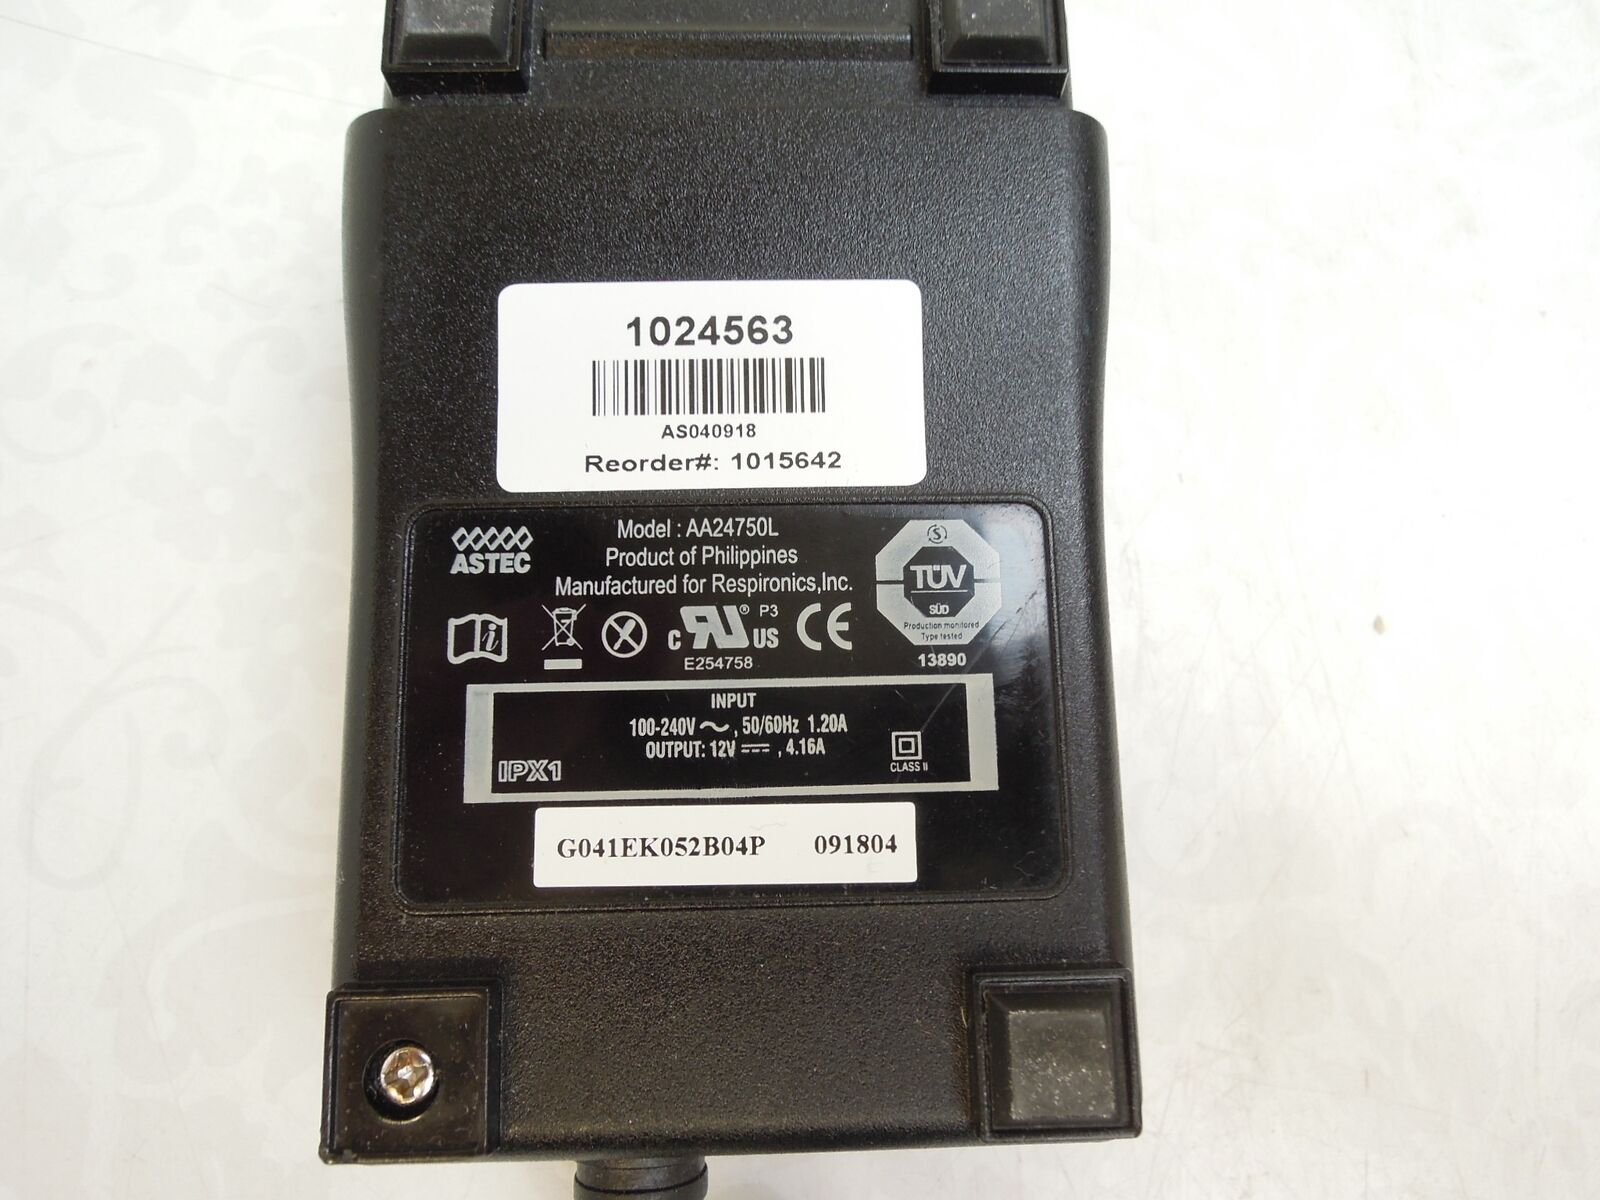 Genuine Respironics AA24750L 12V 4.16A Power Supply Adapter PS AC/DC Brand: RESPIRONICS Nominal Current Rating: 4.1